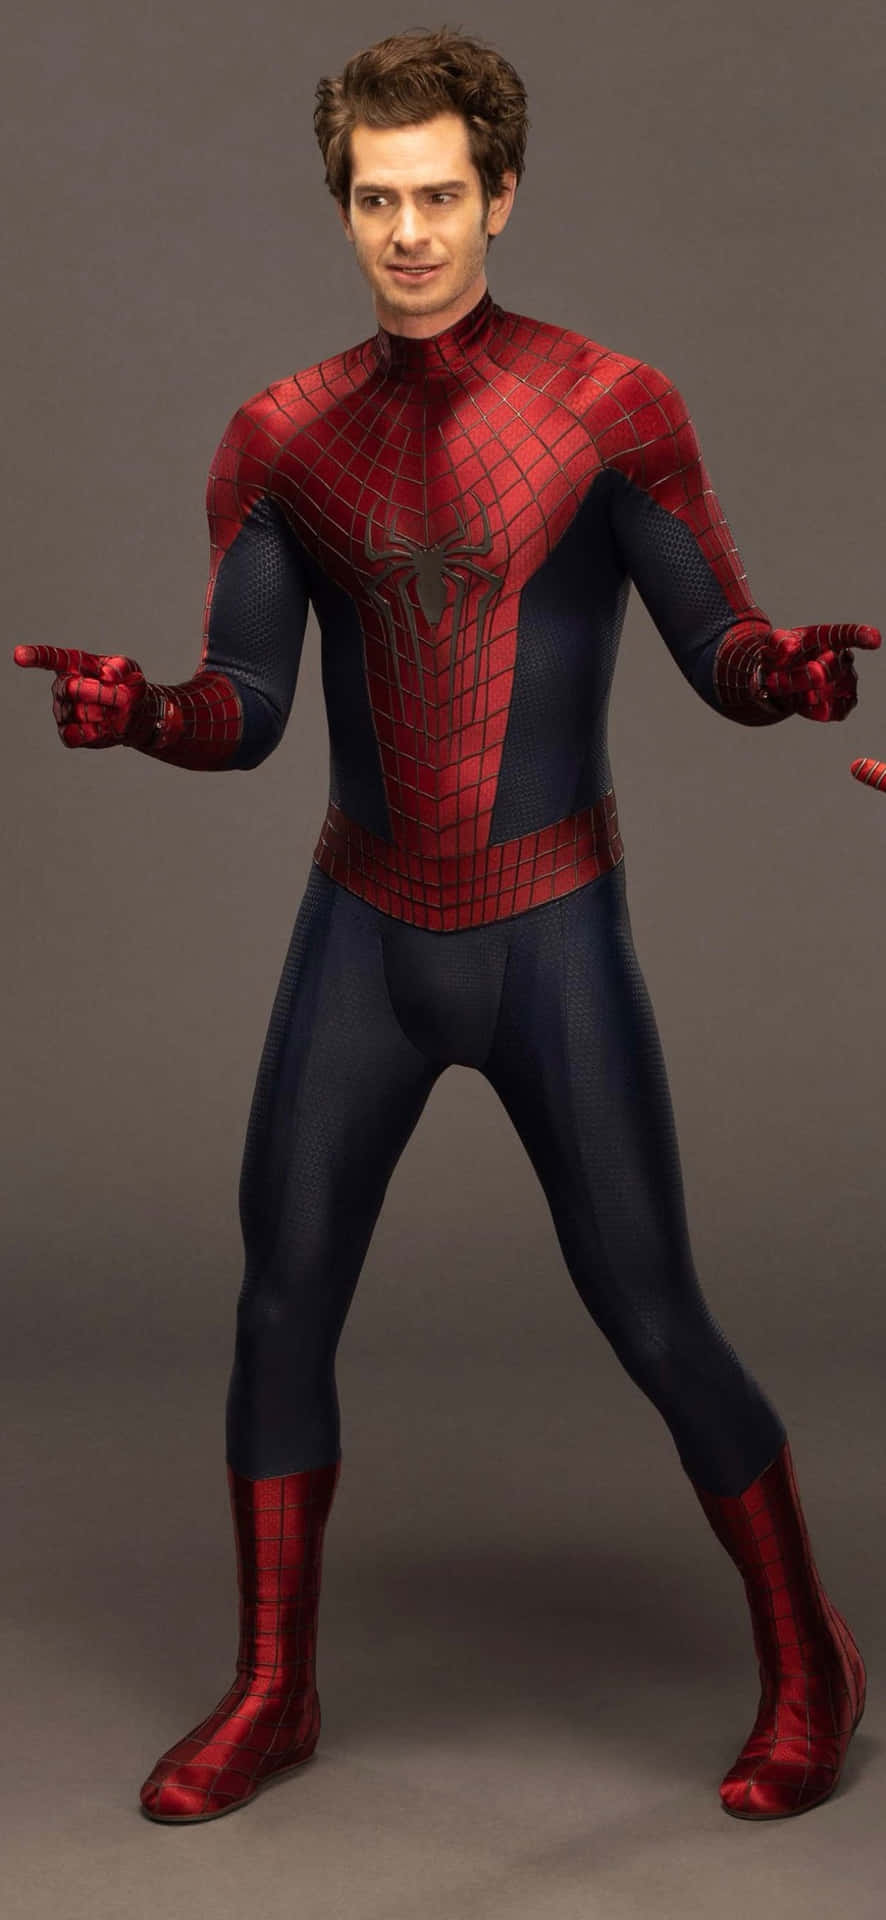 Andrew Garfield suited up as Spider Man for Epic Adventure Wallpaper